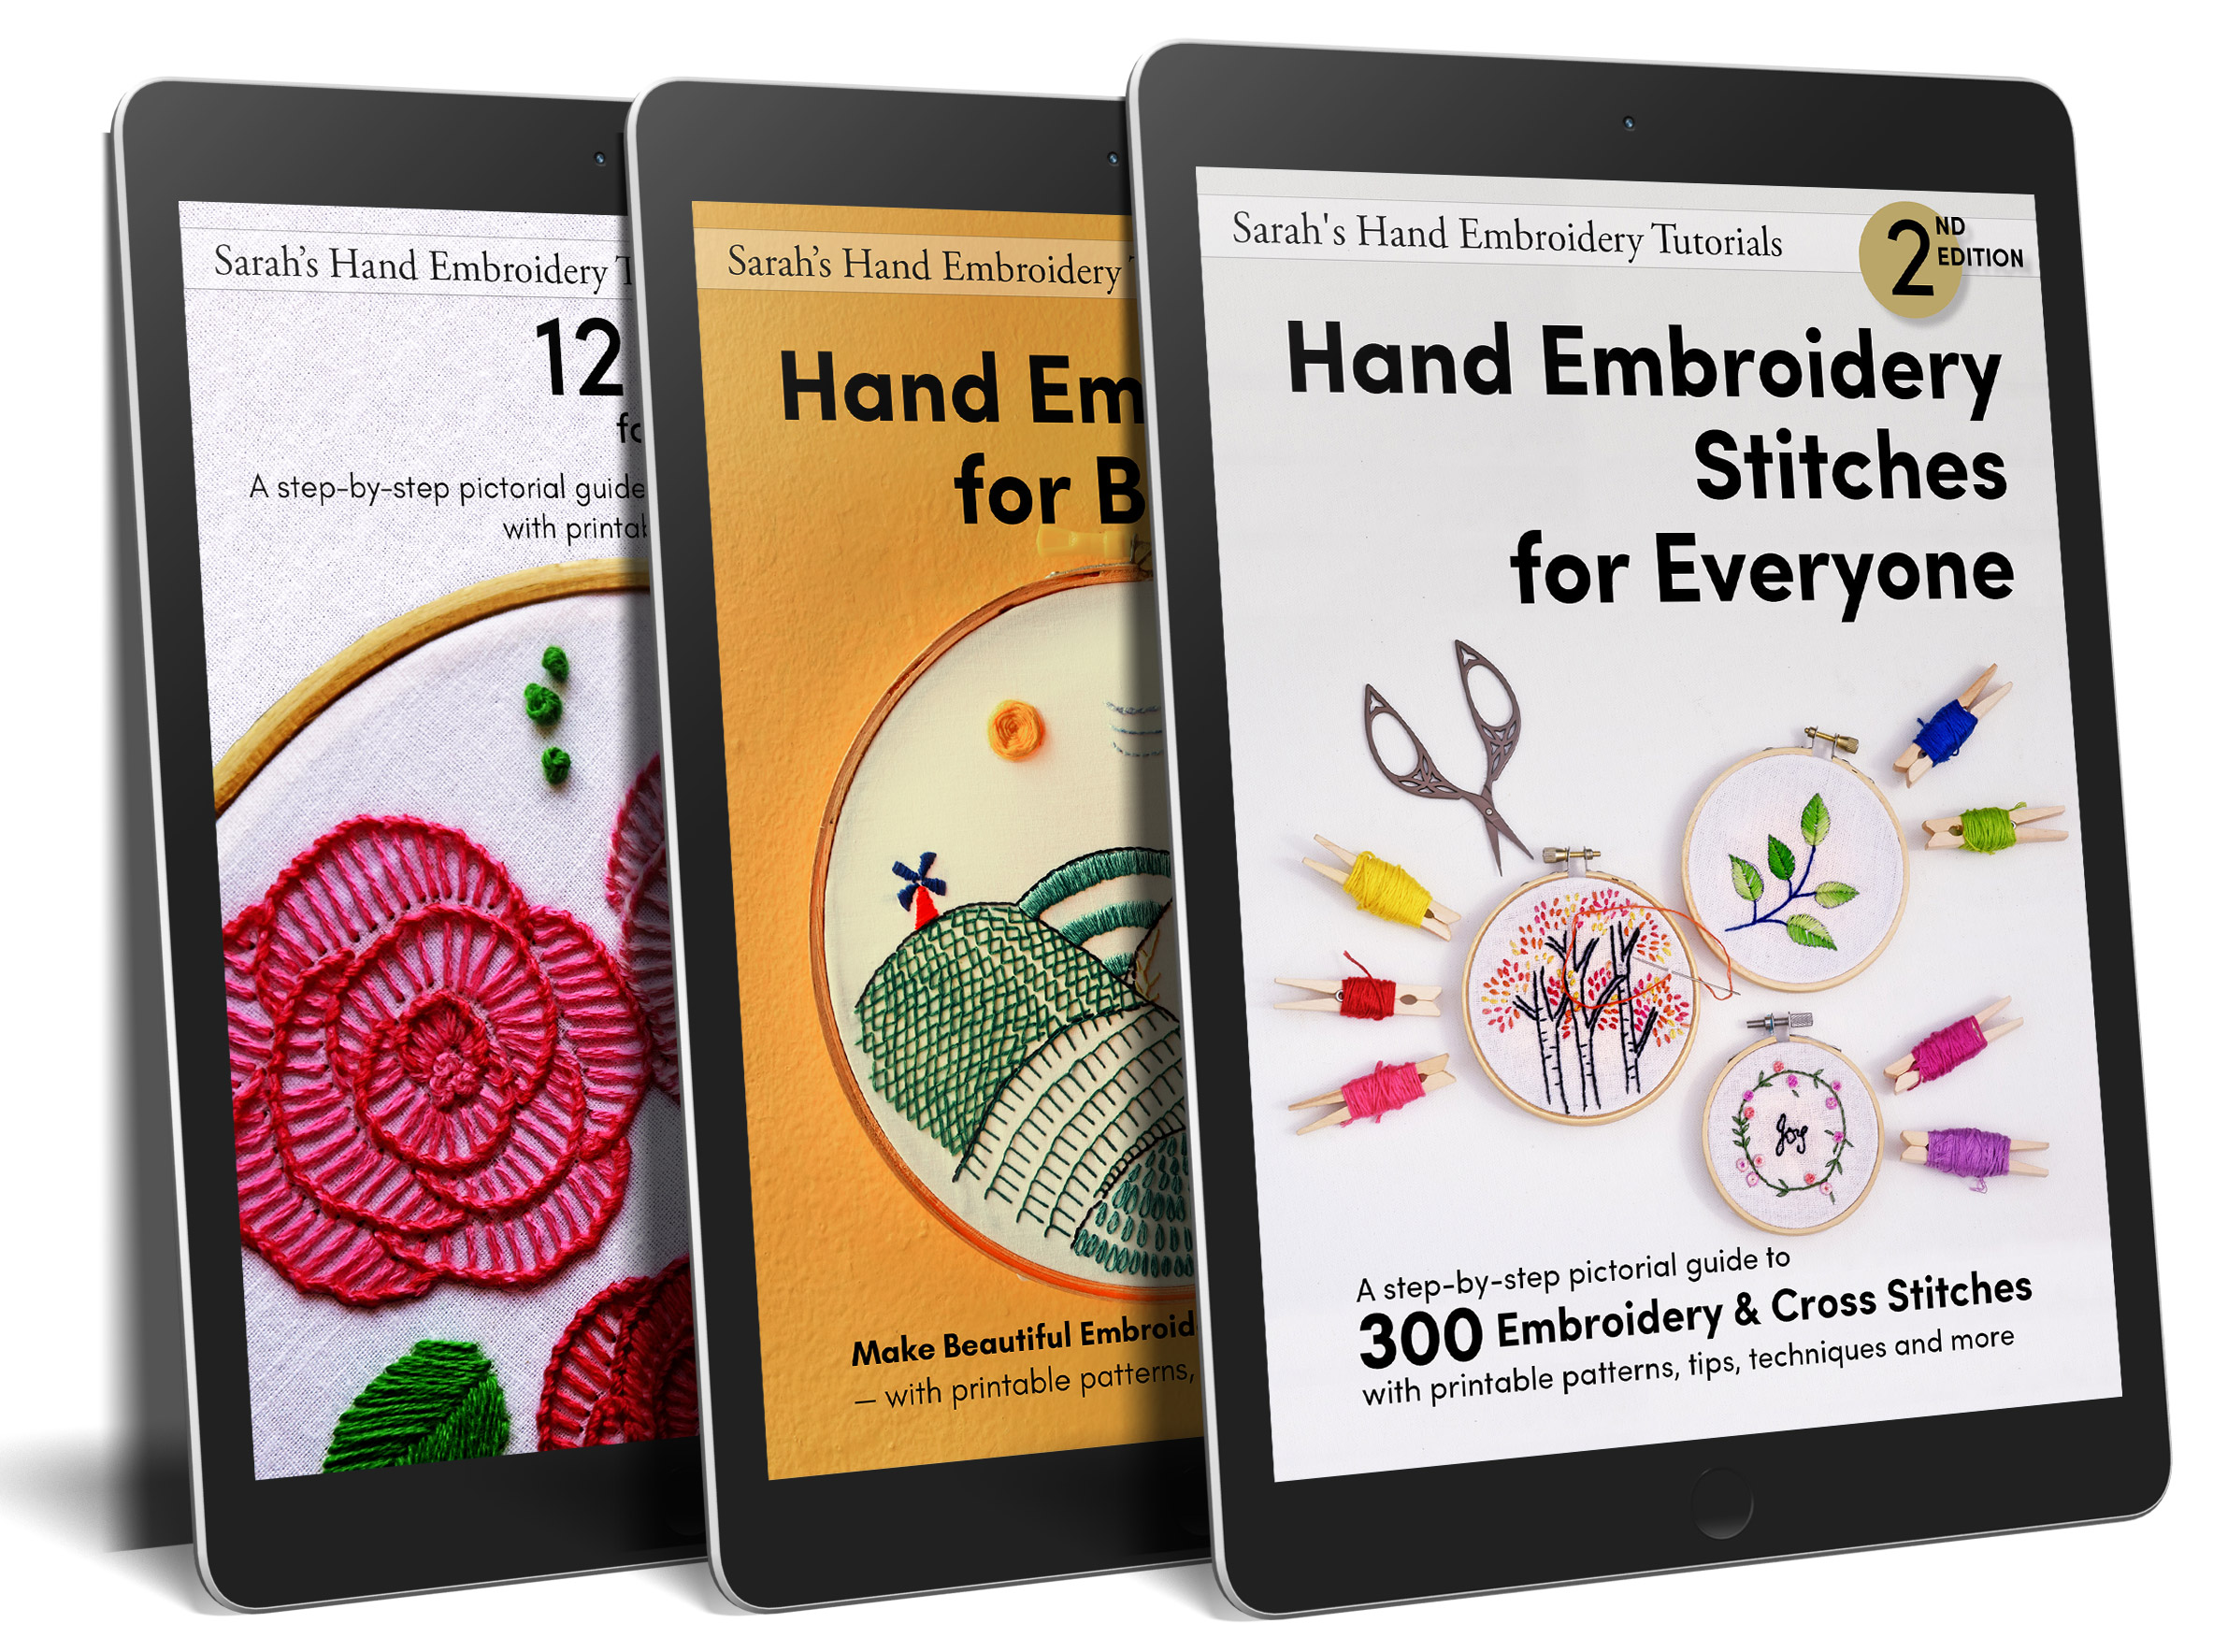 Hand Embroidery Beginner's Bundle of 3 - Sarah's Hand Embroidery Tutorials